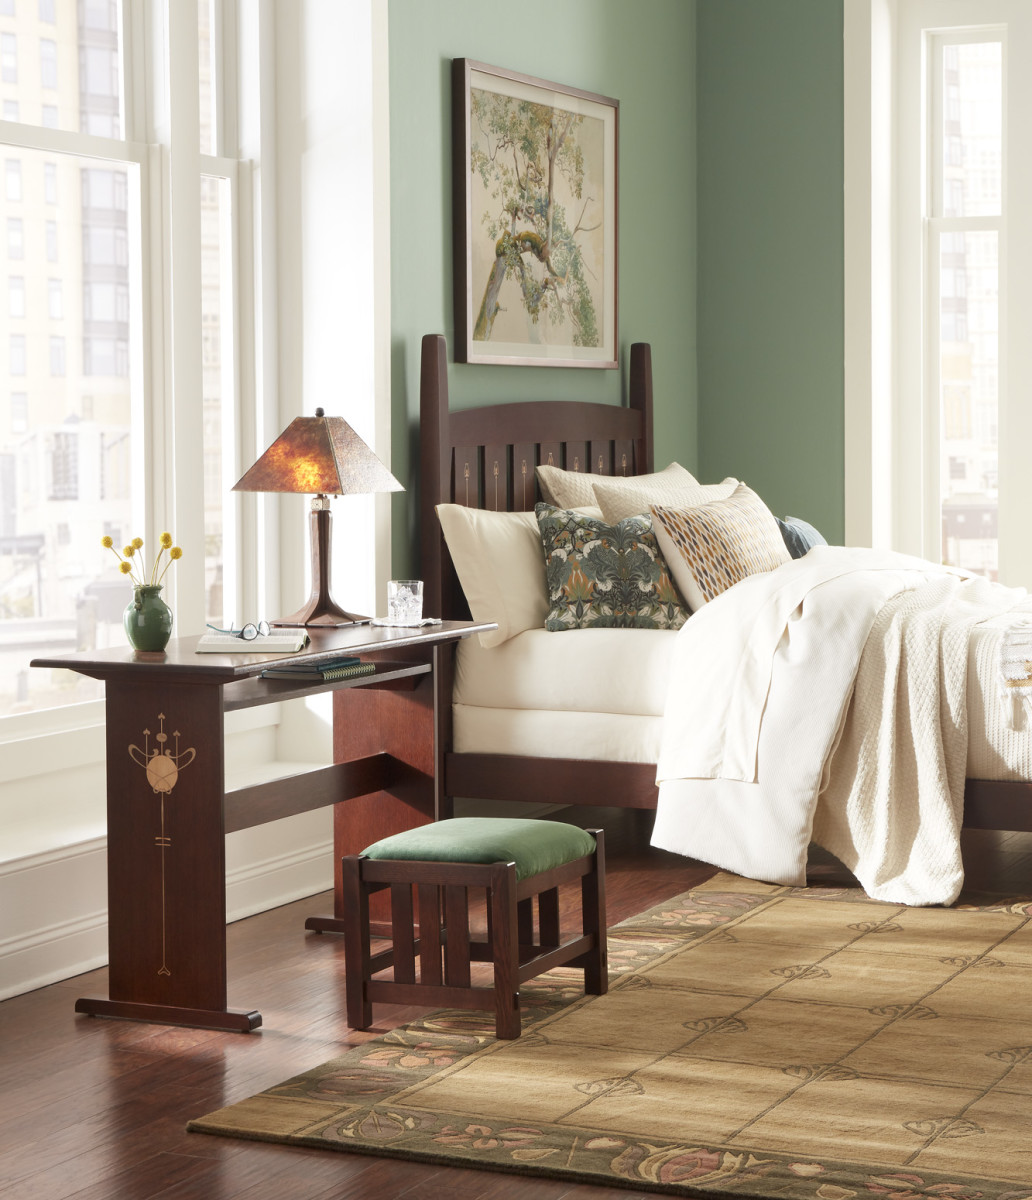 From Stickley's Mission collection, a bed and console with Harvey Ellis-designed inlays.